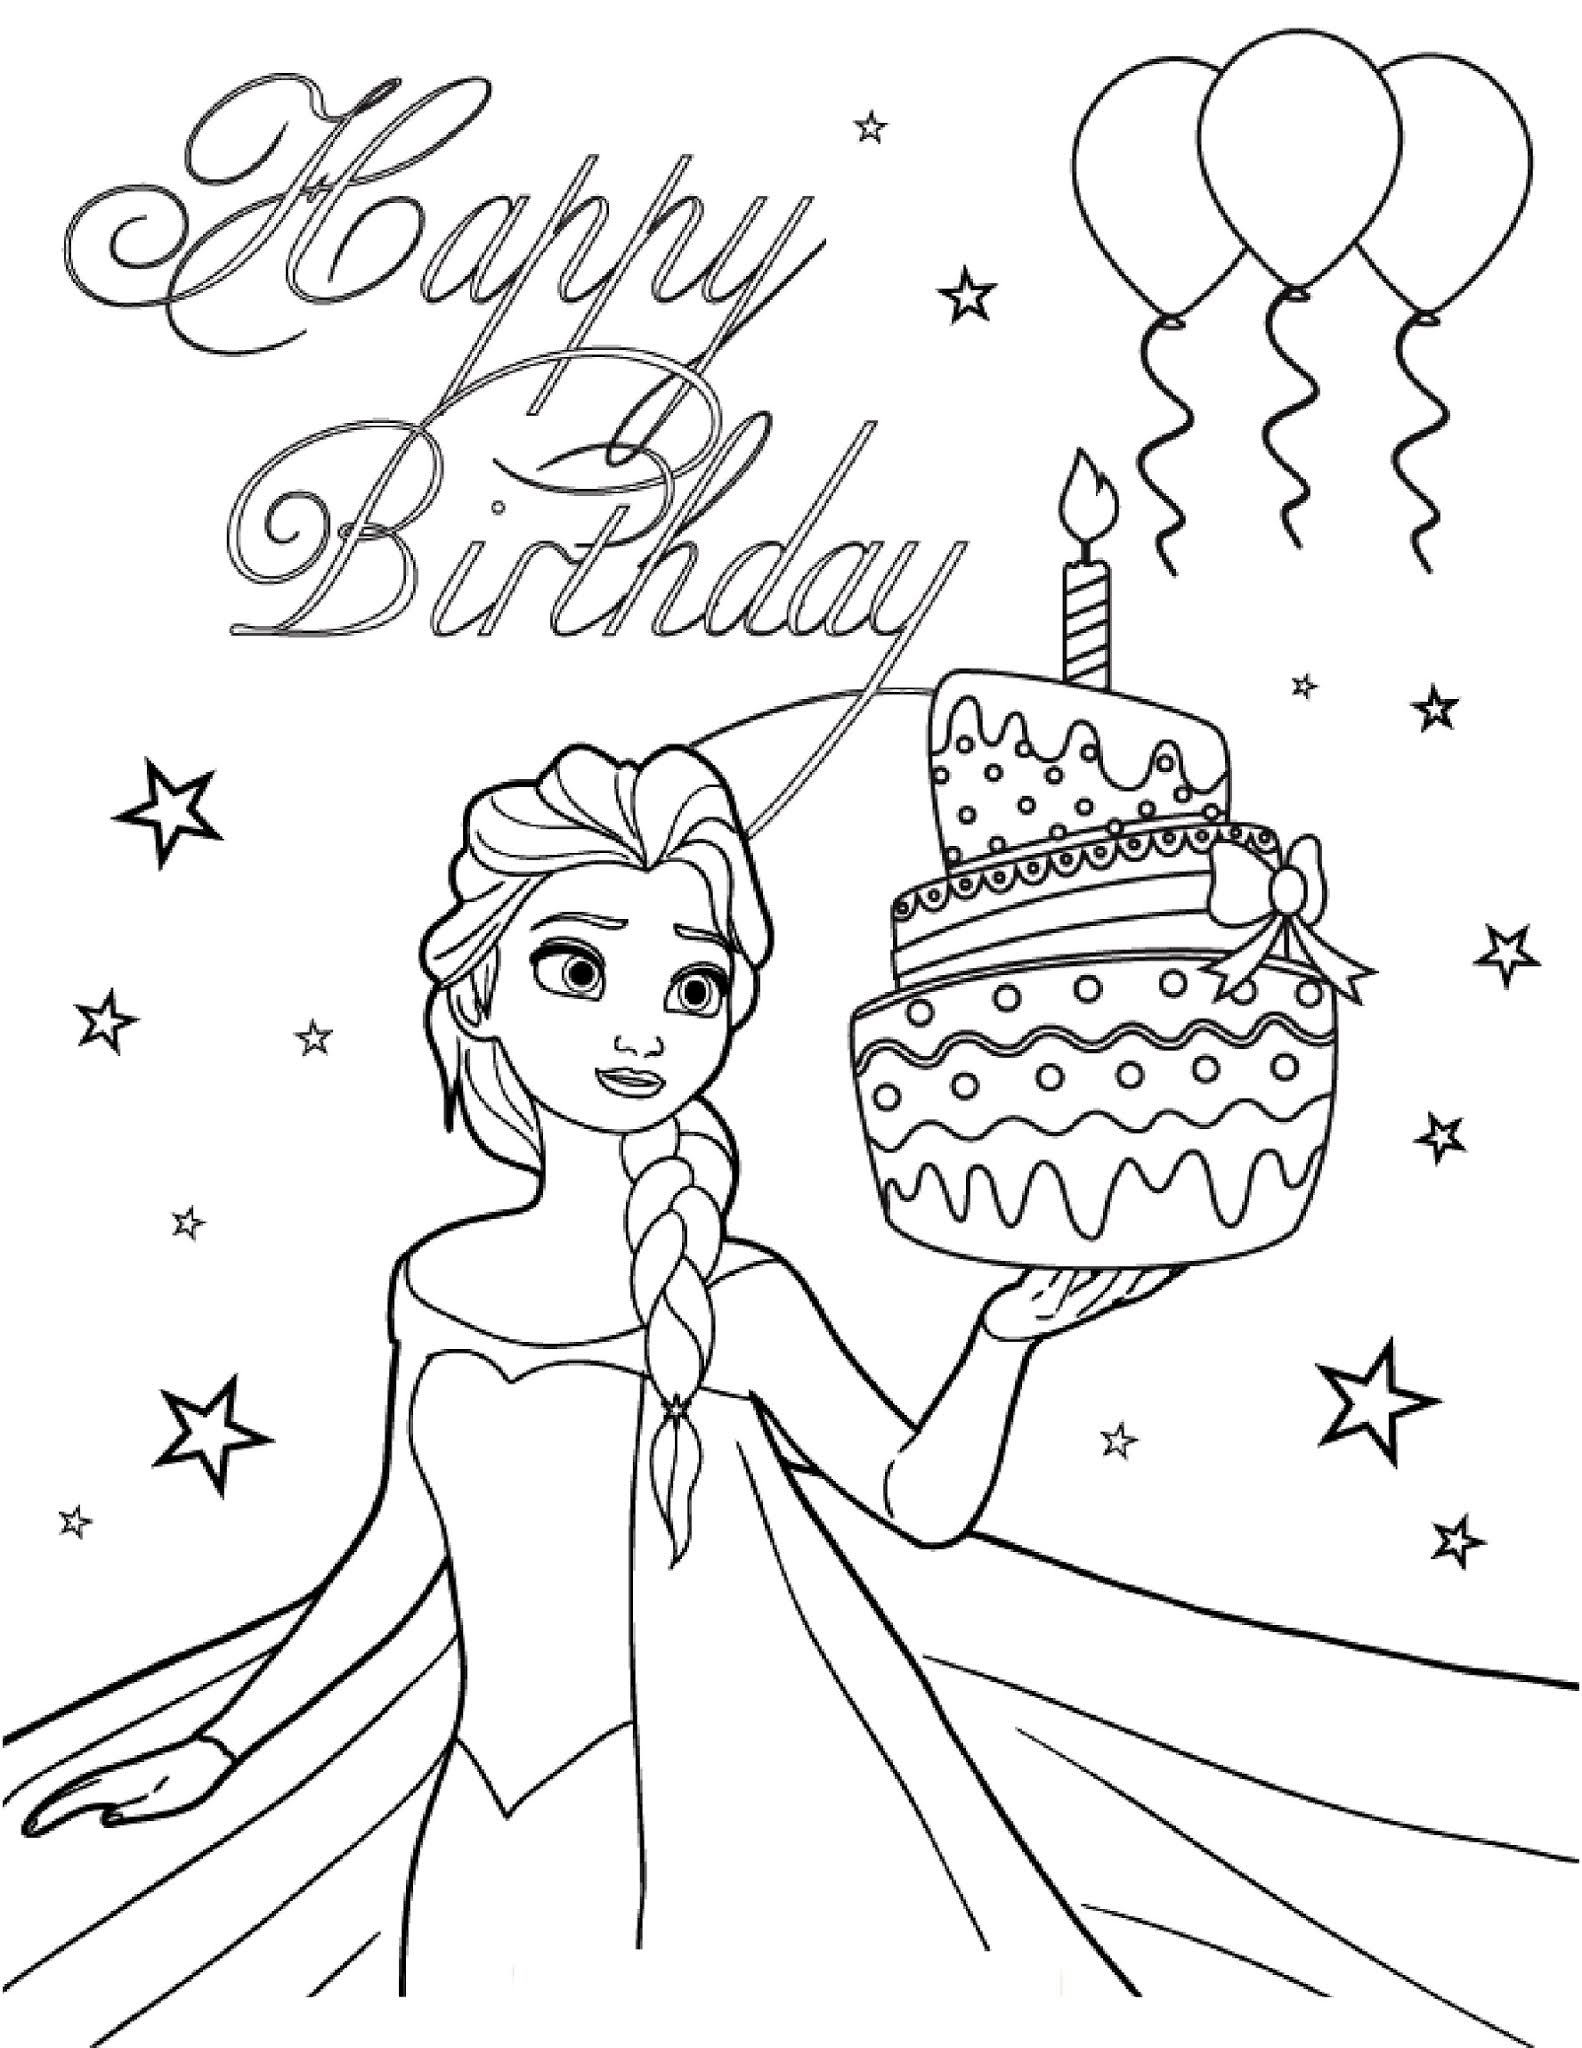 birthday-wishes-coloring-page